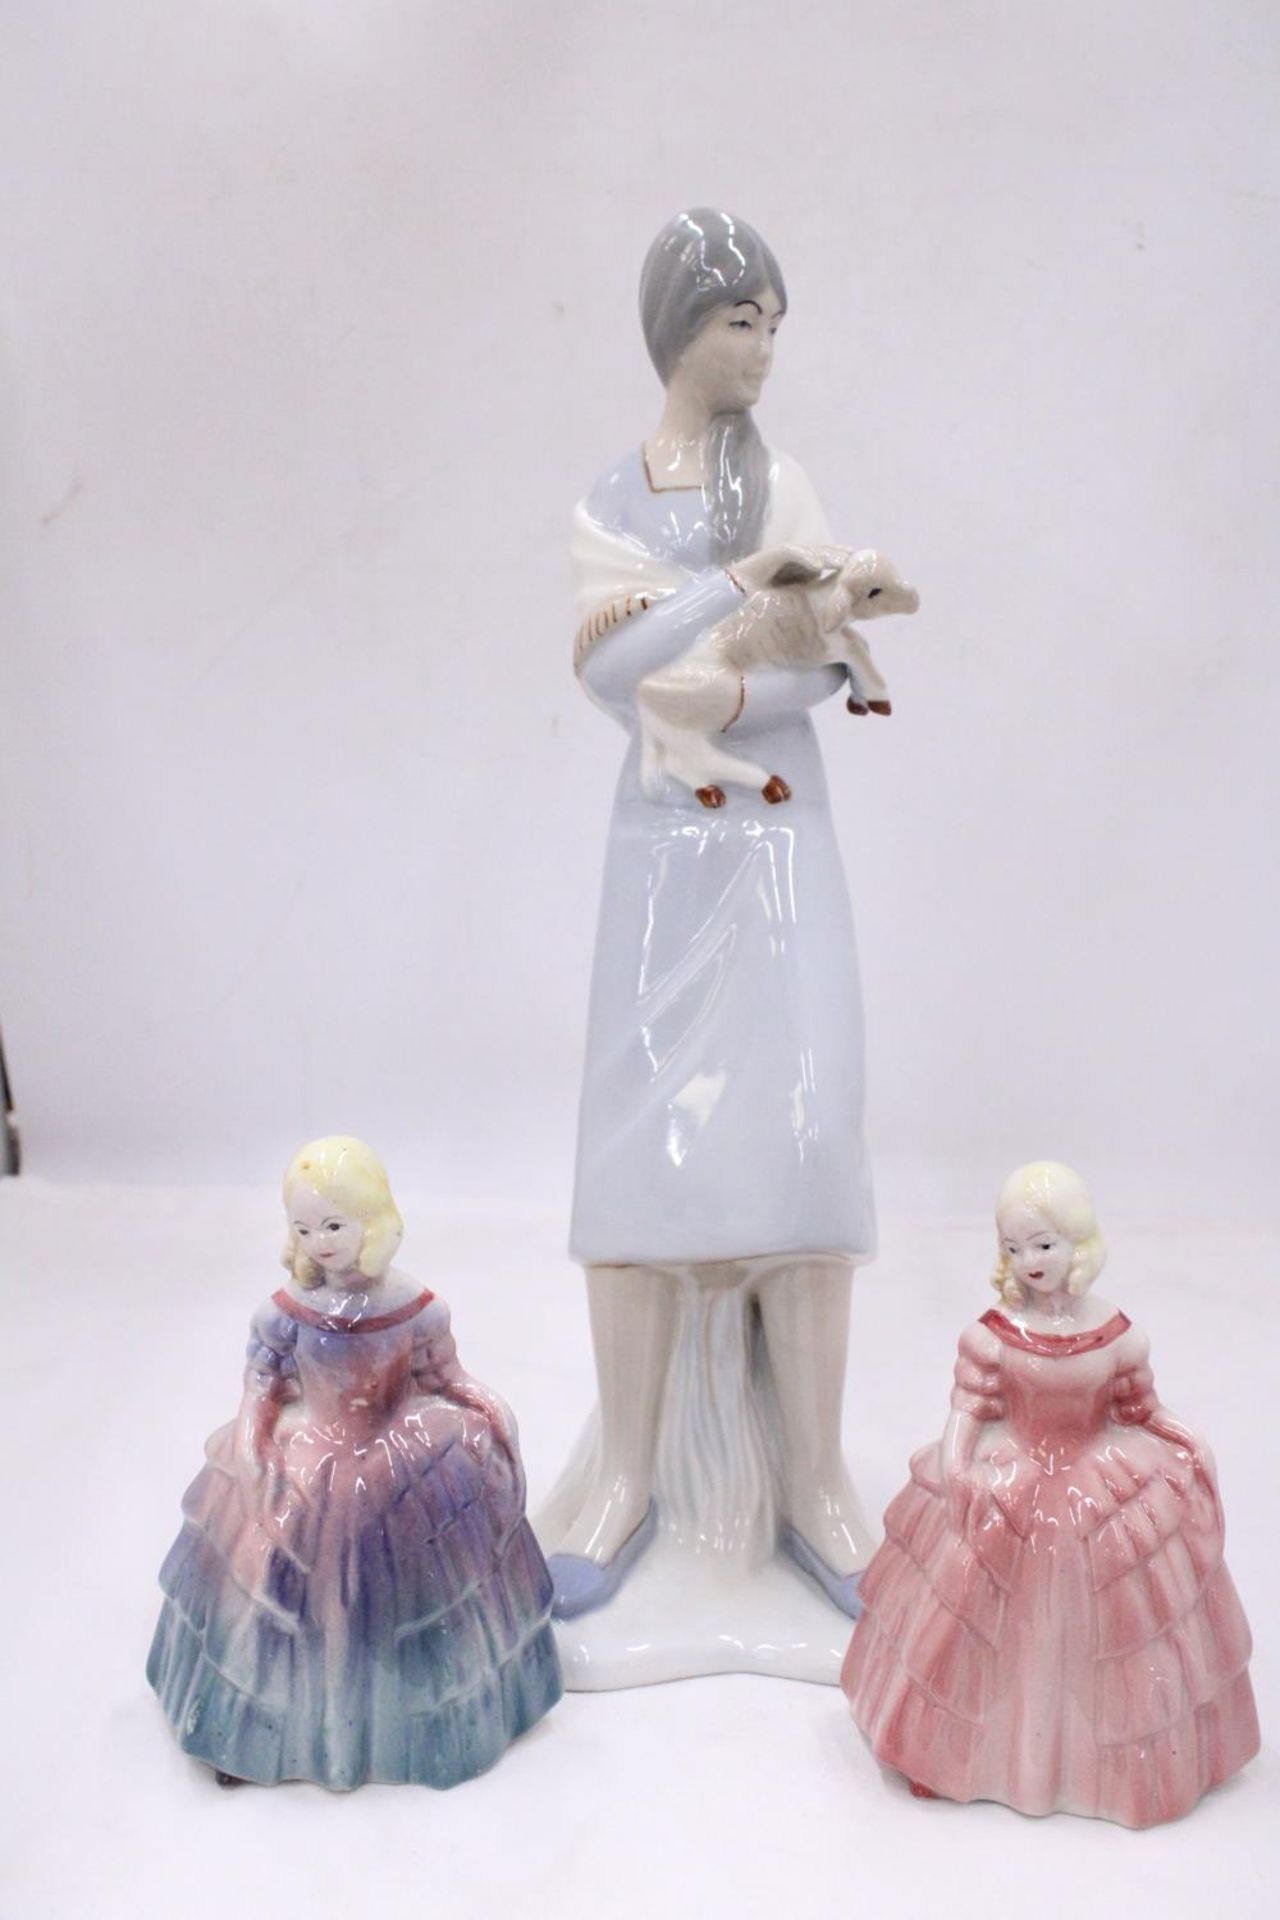 A LLADRO STYLE LADY FIGURE HOLDING A LAMB 38CM TALL, PLUS TWO ROYAL DOULTON STYLE FIGURES - Image 2 of 5